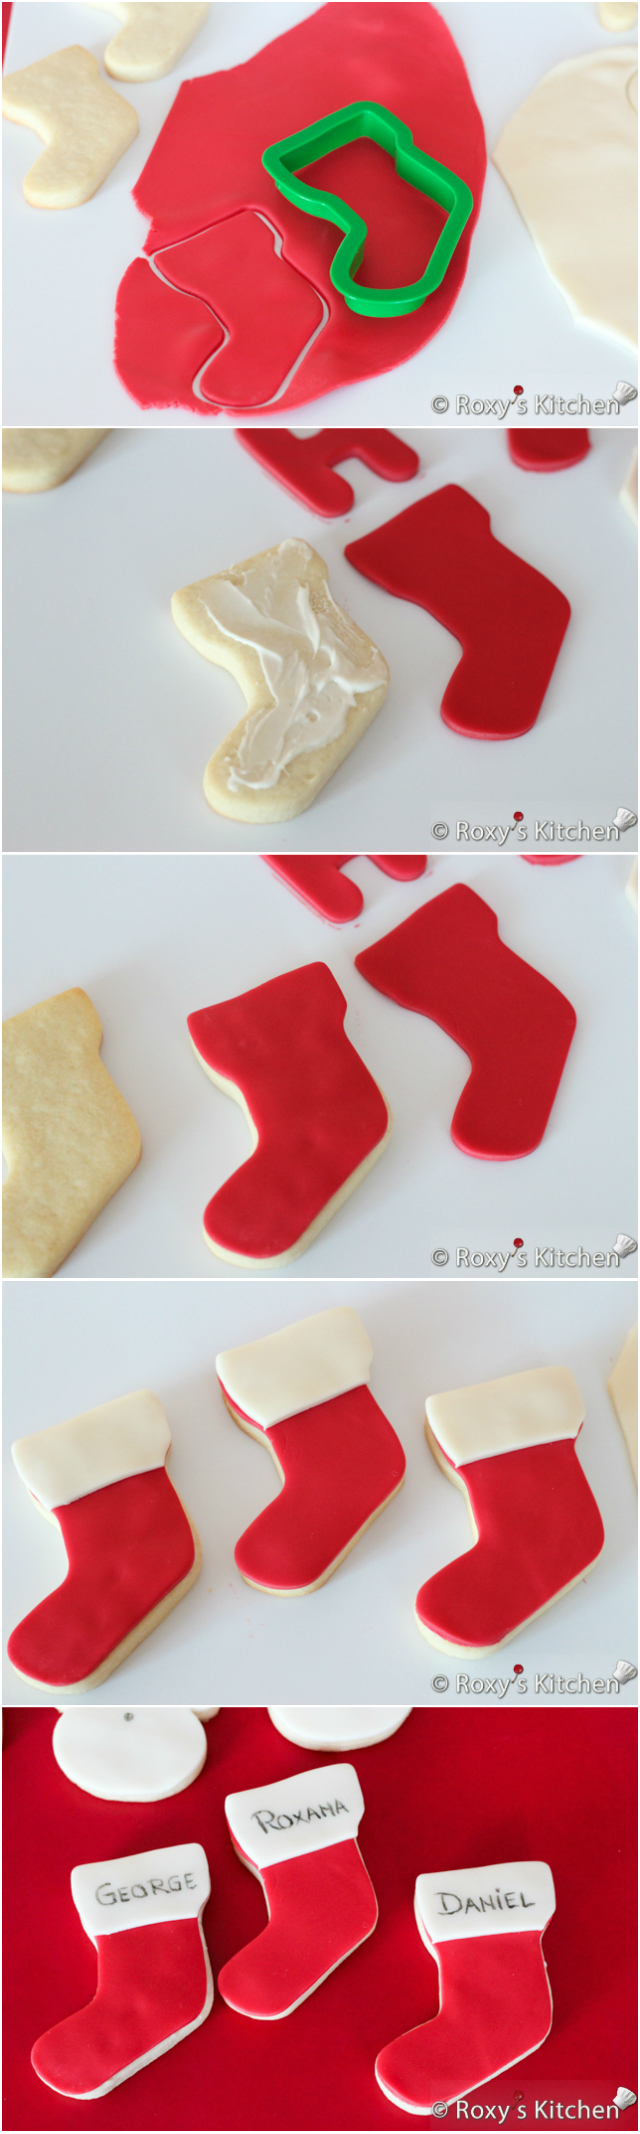 Christmas Stocking Cookies -- Christmas Sugar Cookies Covered with Modeling Chocolate - HO HO HO, snowmen, reindeer, Christmas trees, stockings & presents | Roxy's Kitchen